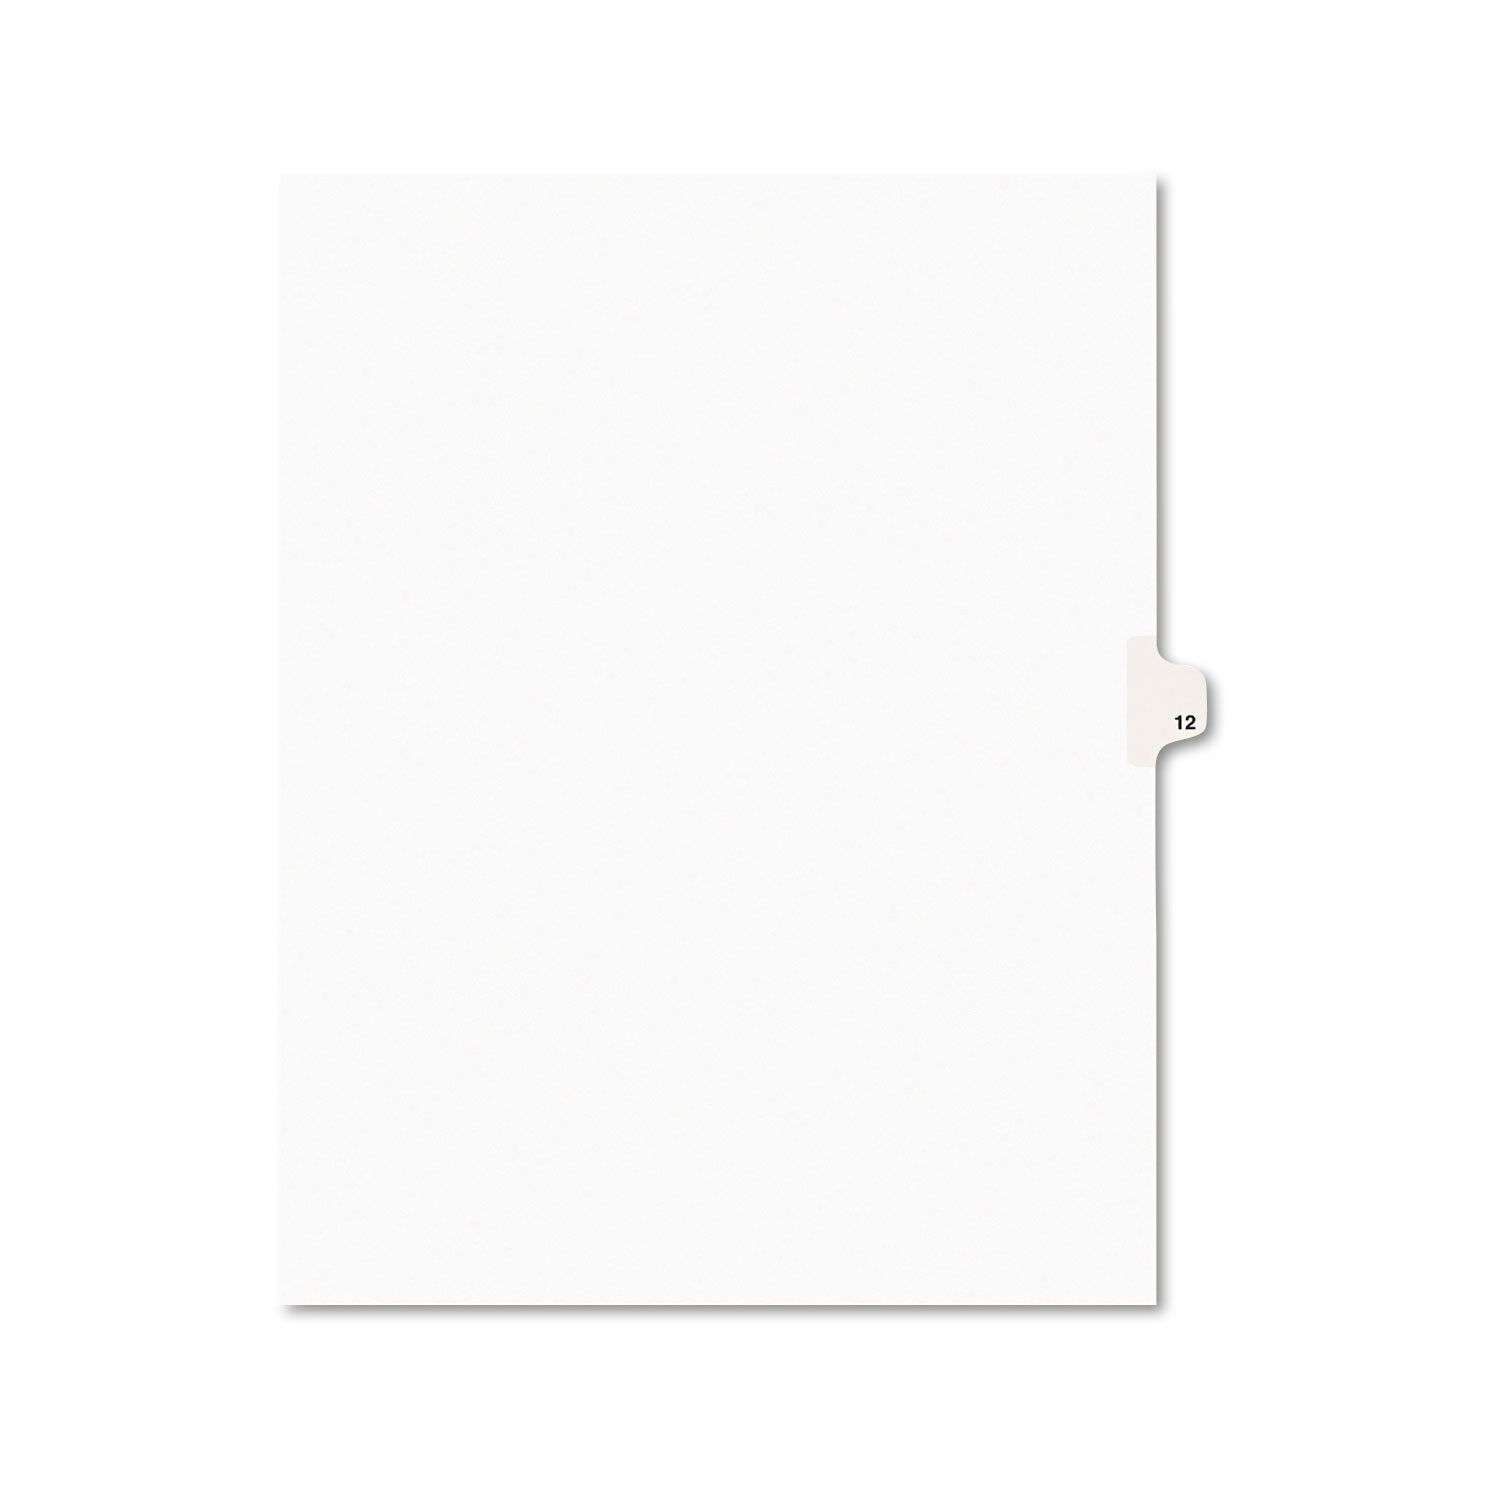  Avery 11922 Preprinted Legal Exhibit Side Tab Index Dividers, Avery Style, 10-Tab, 12, 11 x 8.5, White, 25/Pack (AVE11922) 